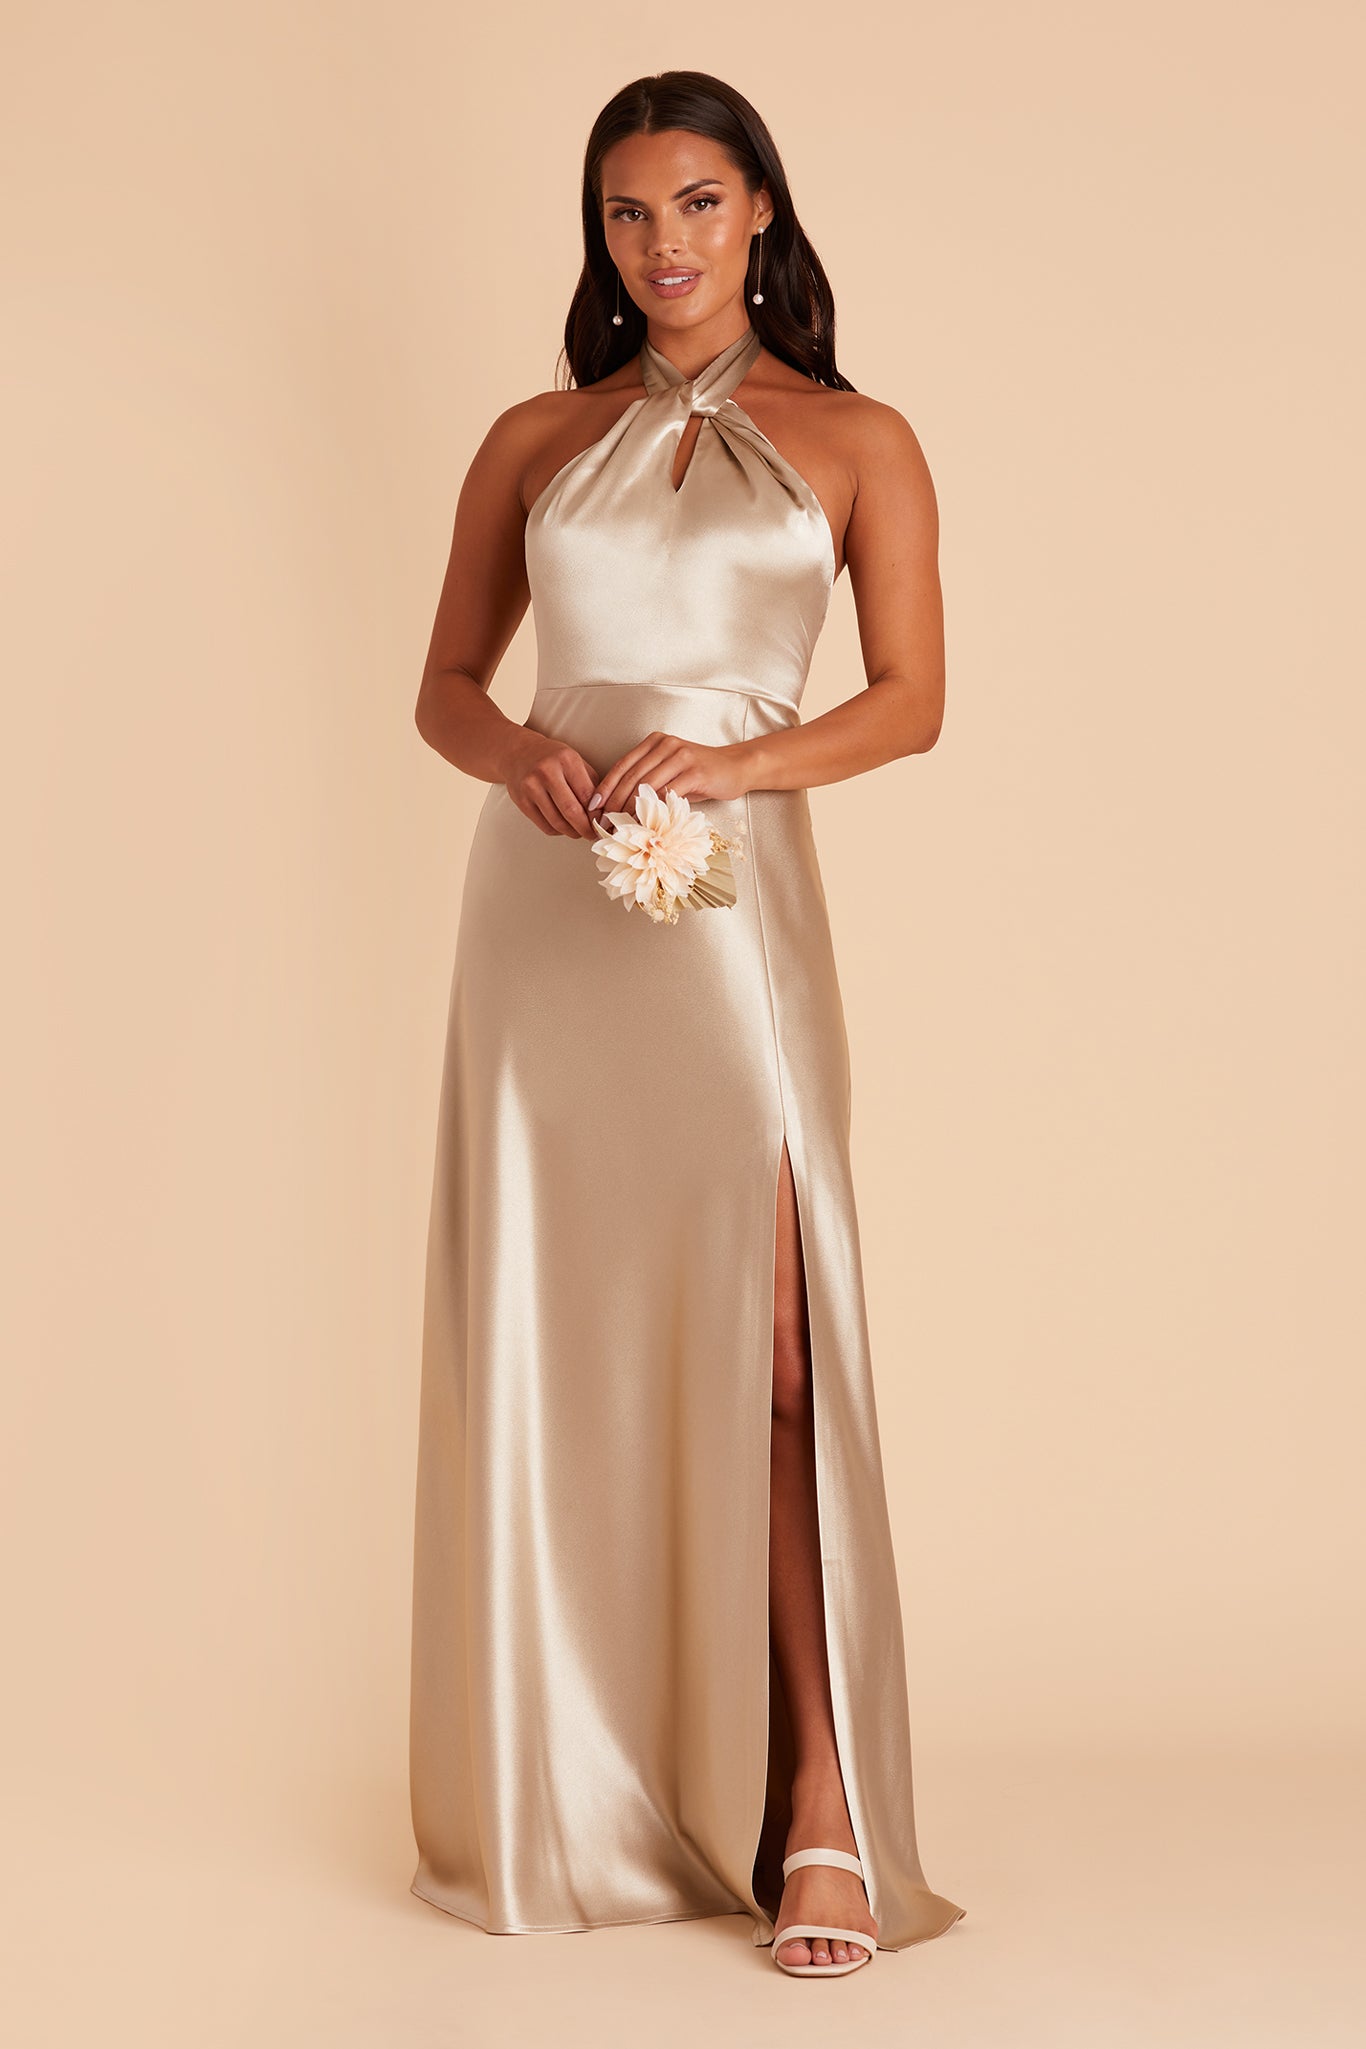 Front view of the Monica Dress in neutral champagne satin shows a model with a medium skin tone wearing an A-line floor length dress with a left slit. The Grecian twist front halter with tie back creates a dress bodice that conforms to the bosom and waist with a smooth fit at the dress skirt top. 